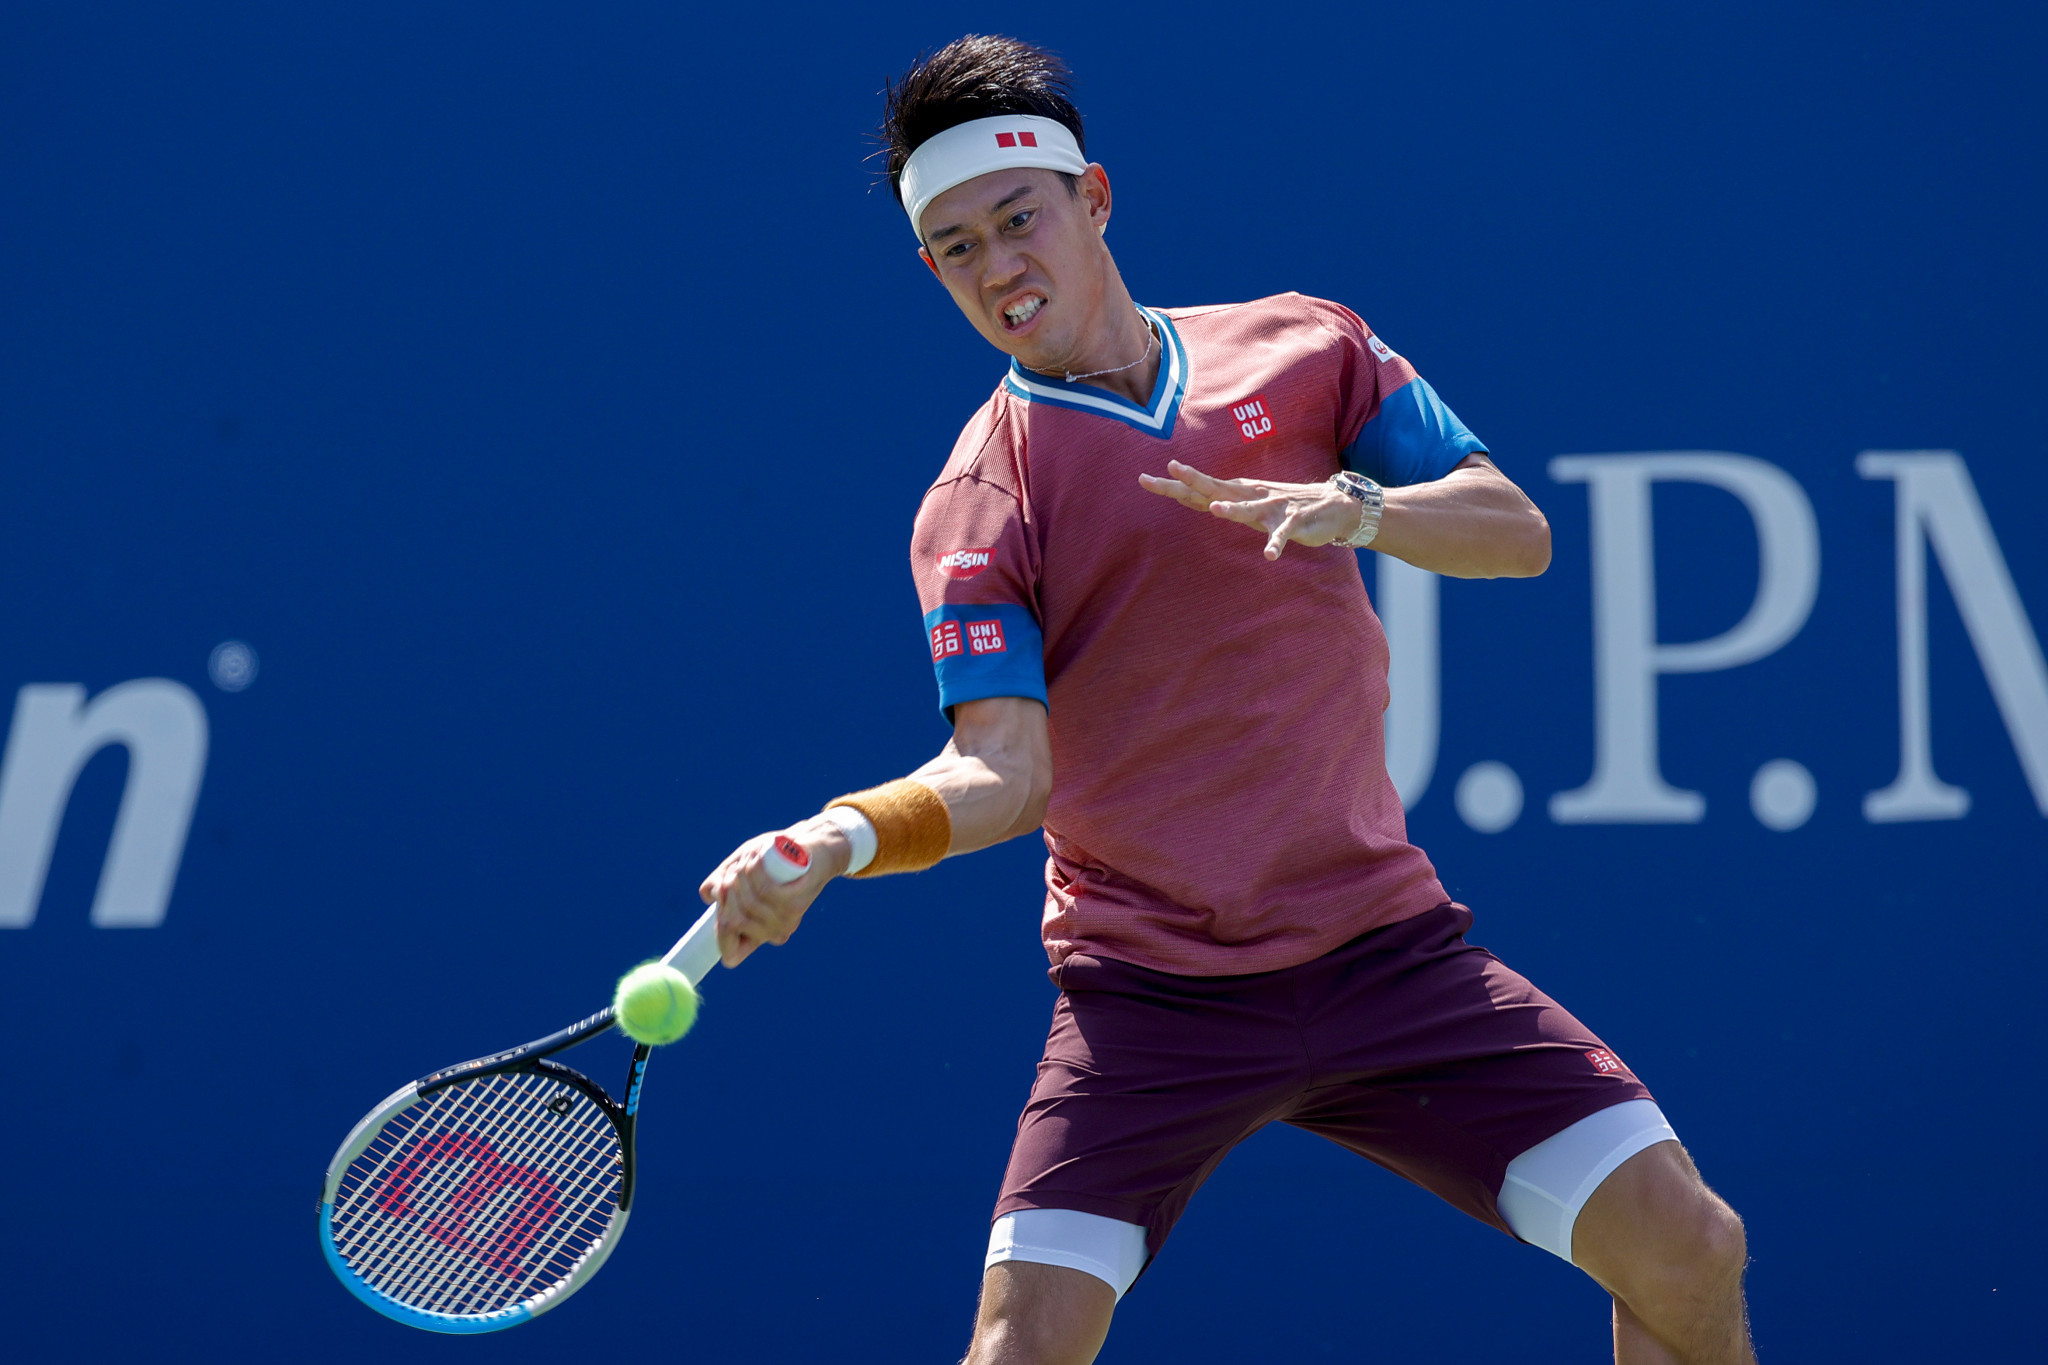 Men's singles runner-up at the 2014 US Open Kei Nishikori won in four sets against Salvatore Caruso in his first round match ©Getty Images